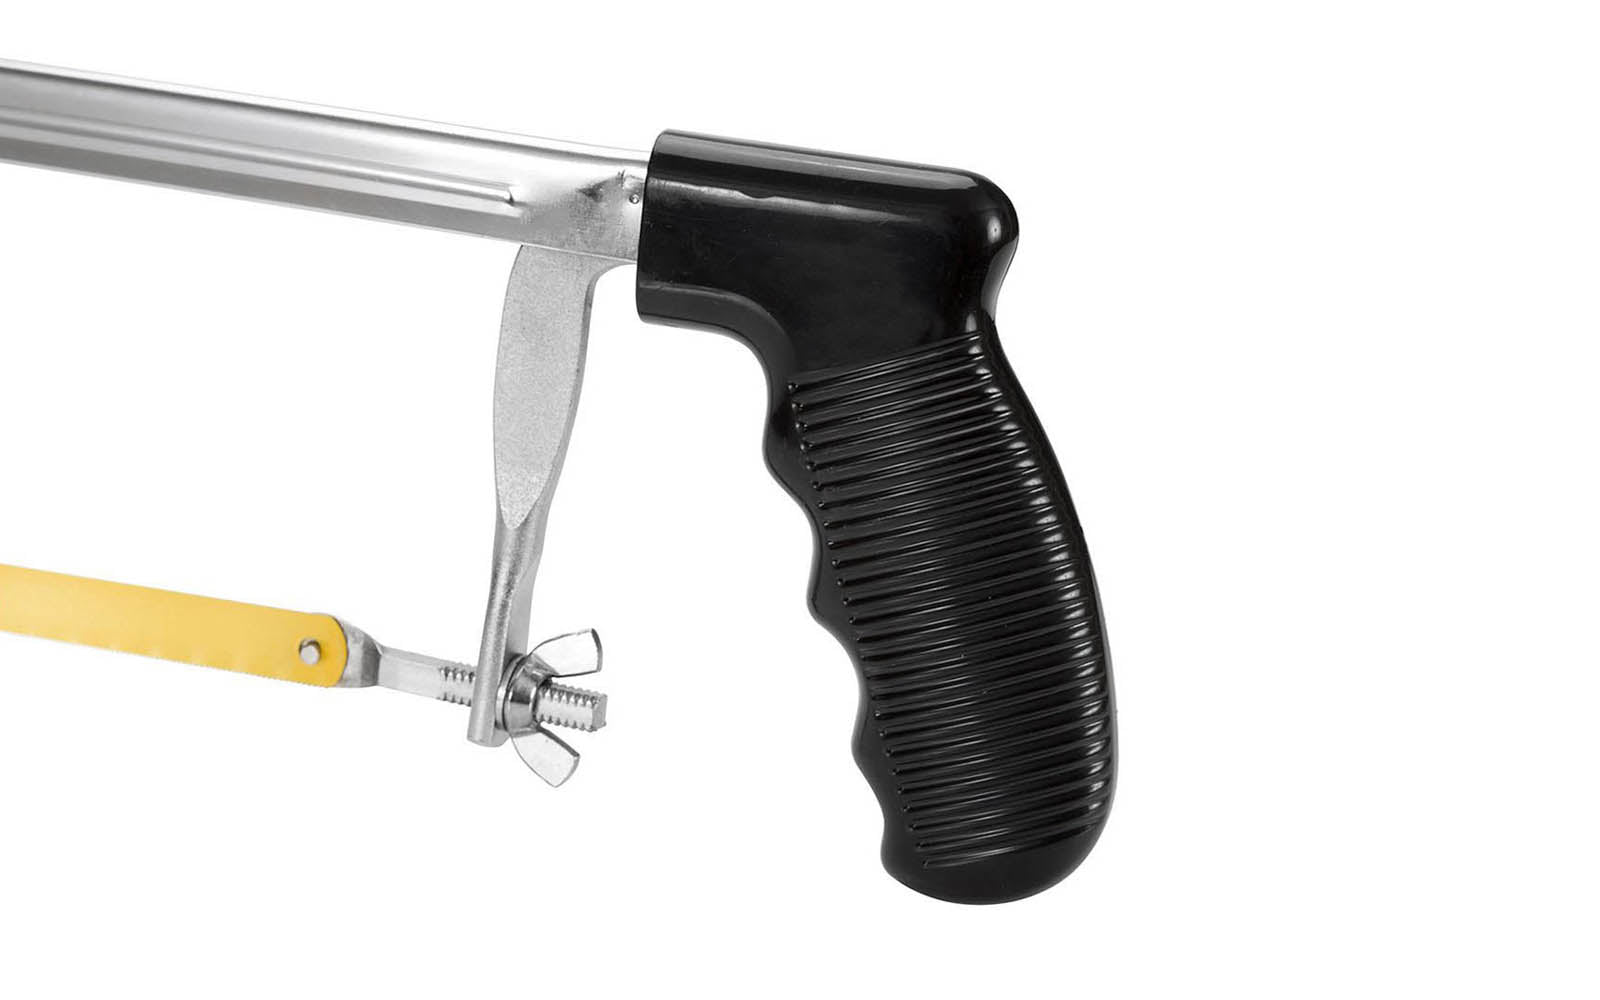 No. 50 GreatNeck Adjustable Pistol Grip Hacksaw is good for cutting glass, ceramic tile, hardened steel or bone, & variety of materials. Heavy duty steel frame provide strength & durability. Adjustable Frame Accepts 10" & 12" Hacksaw Blades. 3" Cutting Depth. High Impact Pistol Grip Handle. 16" length. 076812009692